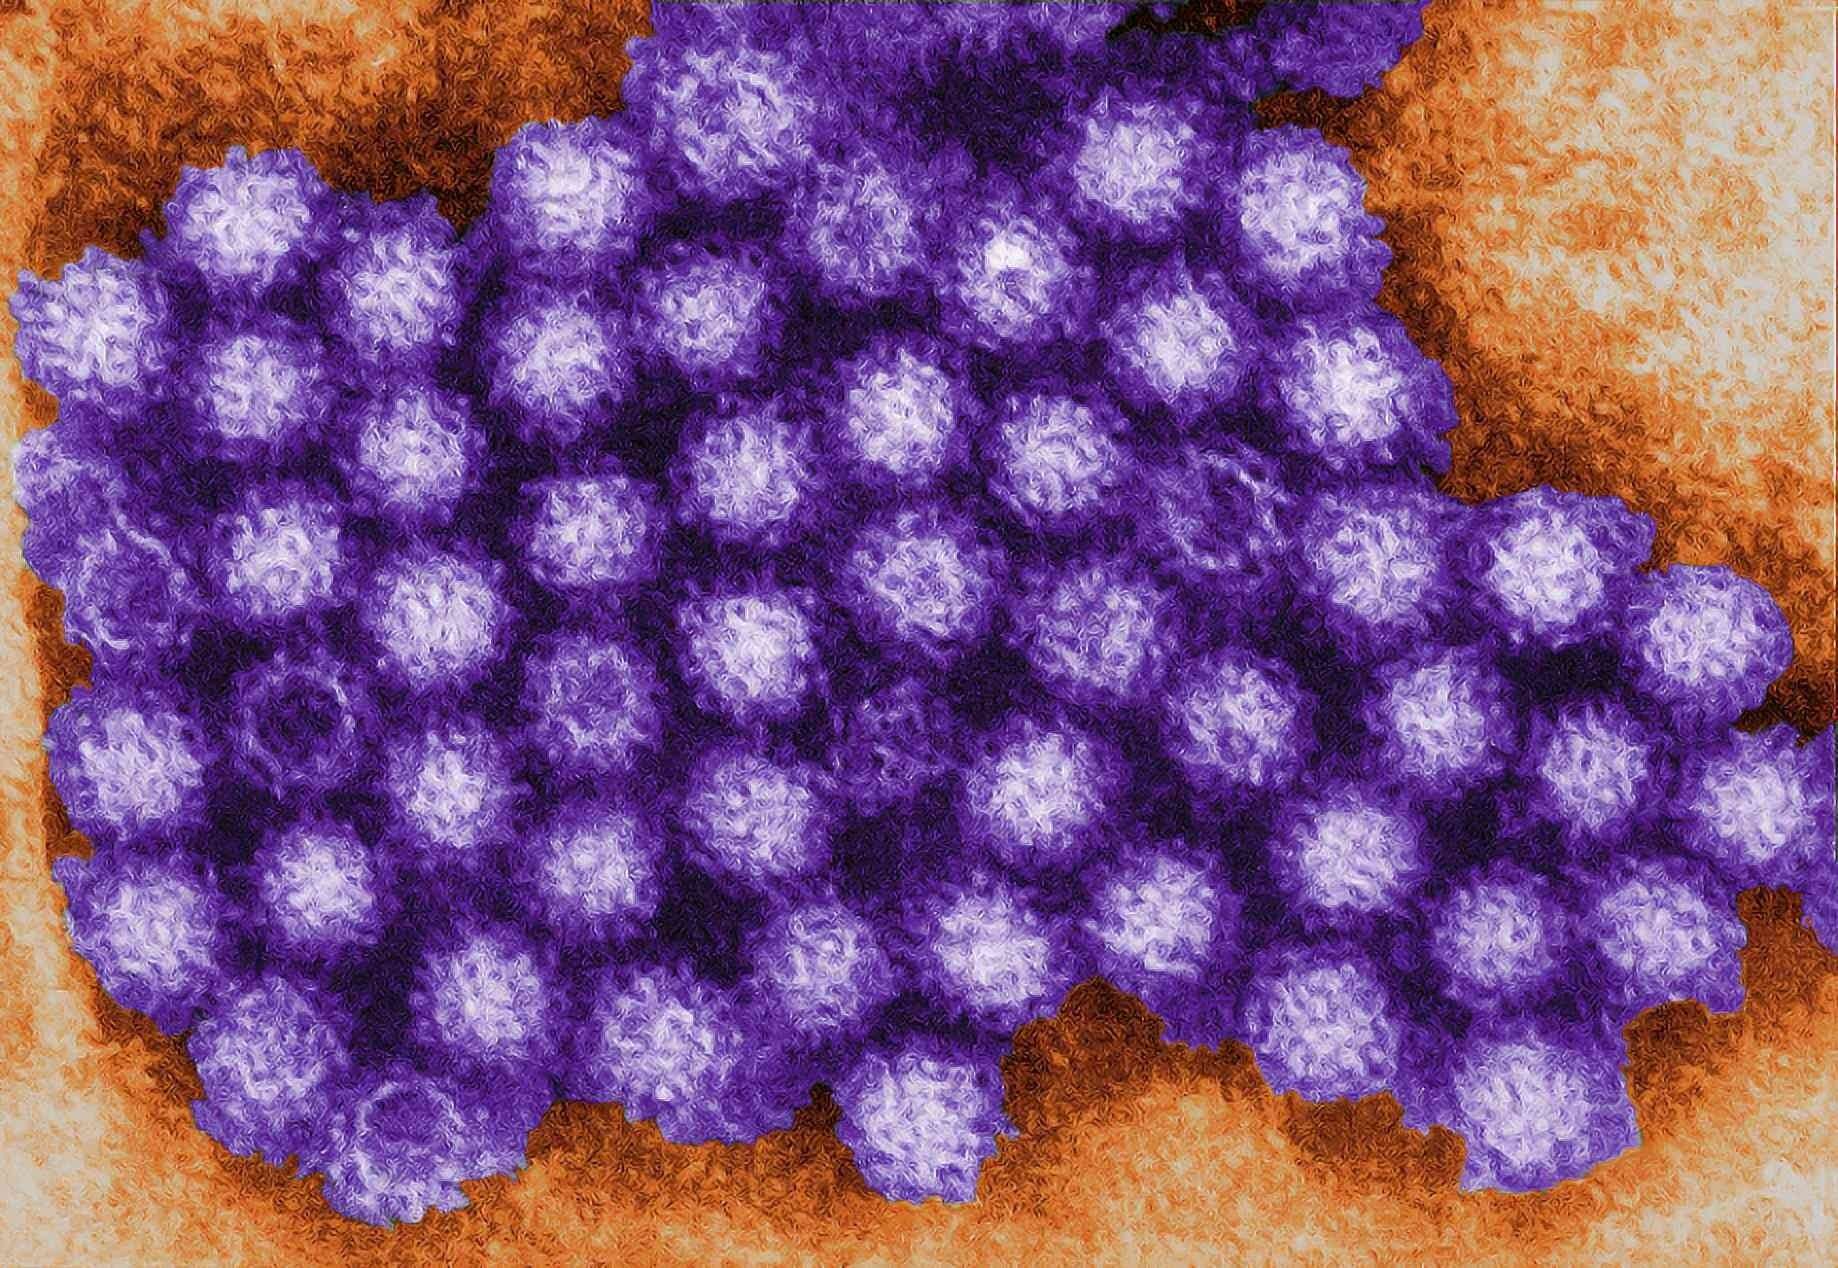 Norovirus causes sickness and is easily passed between people